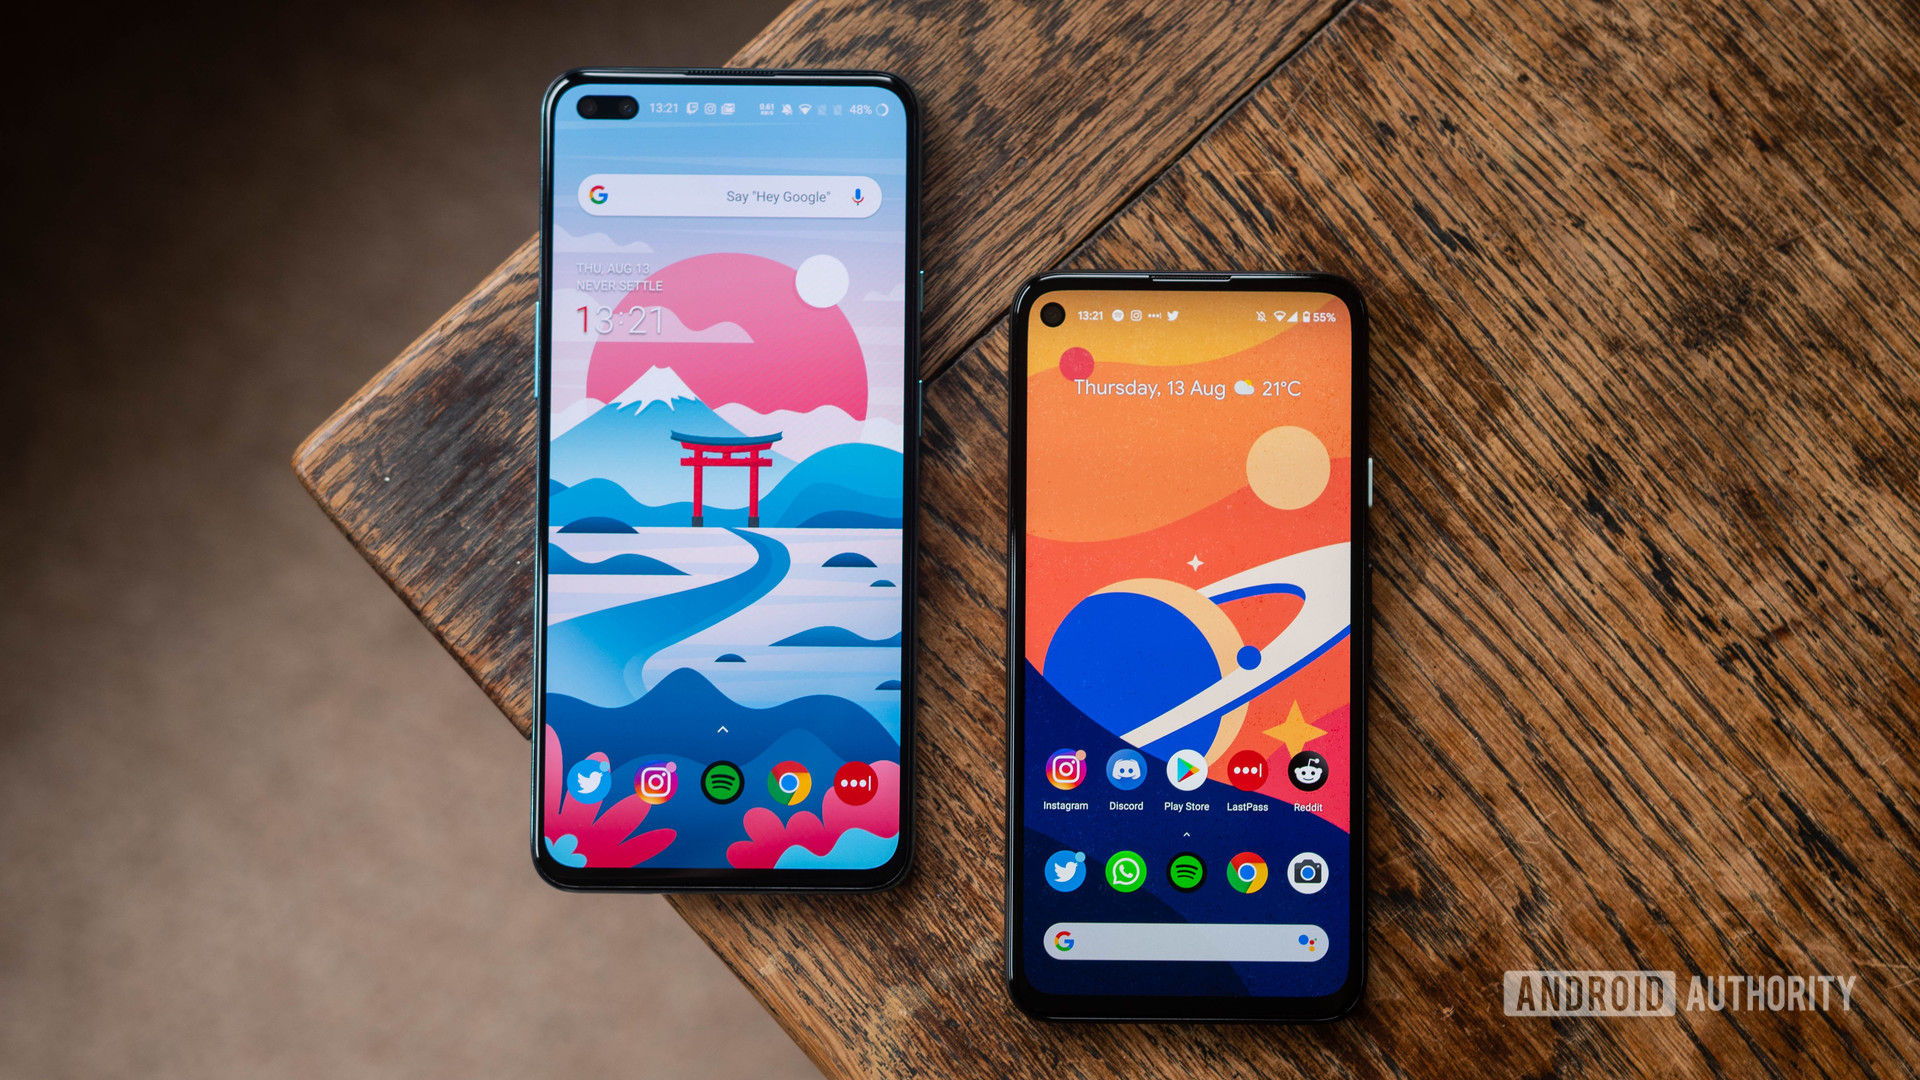 OnePlus Nord vs Pixel 4a Both devices side by side in a staggered view - Using WhatsApp without a SIM card